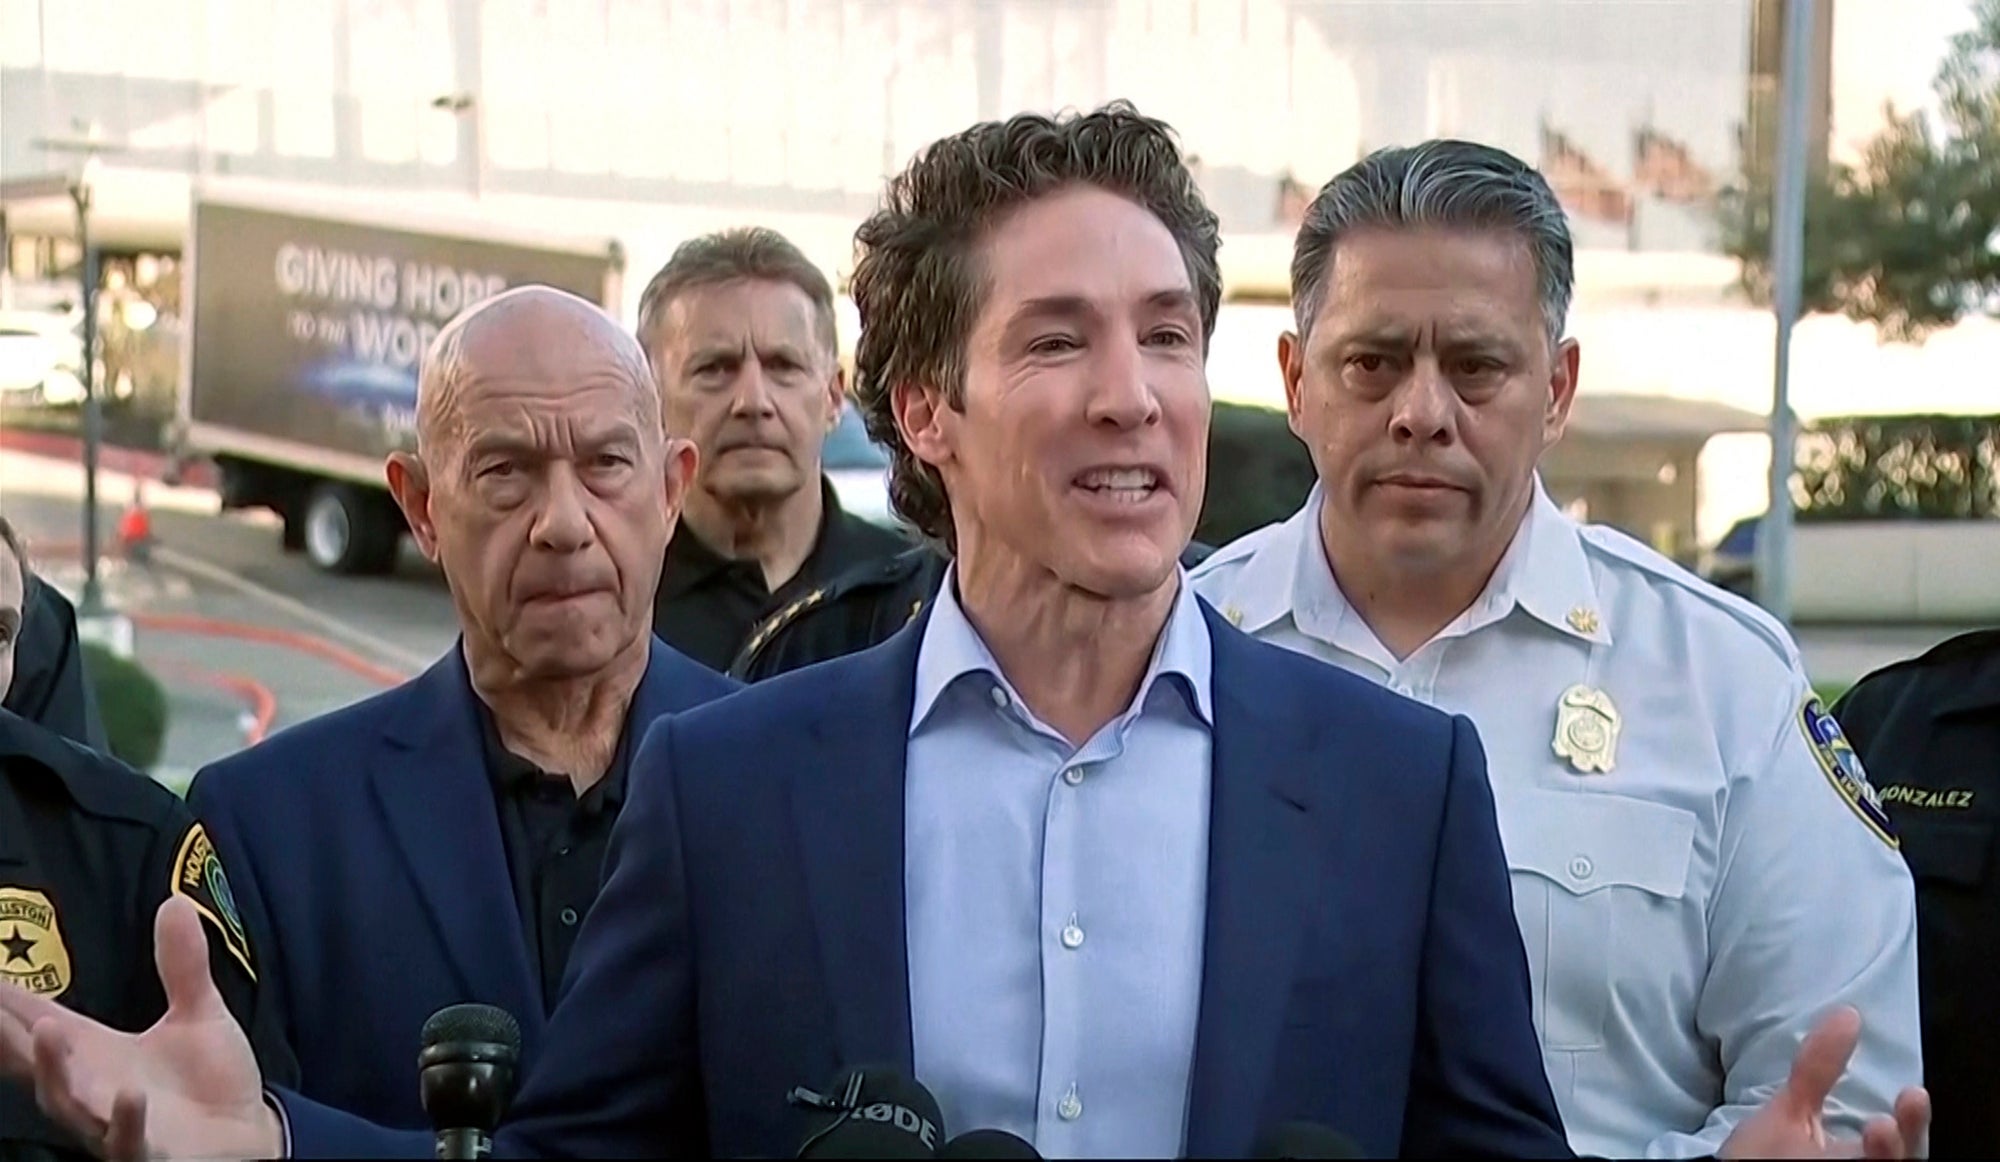 Joel Osteen, the lead pastor at Lakewood Church, is one of the US’s most notable religious leaders